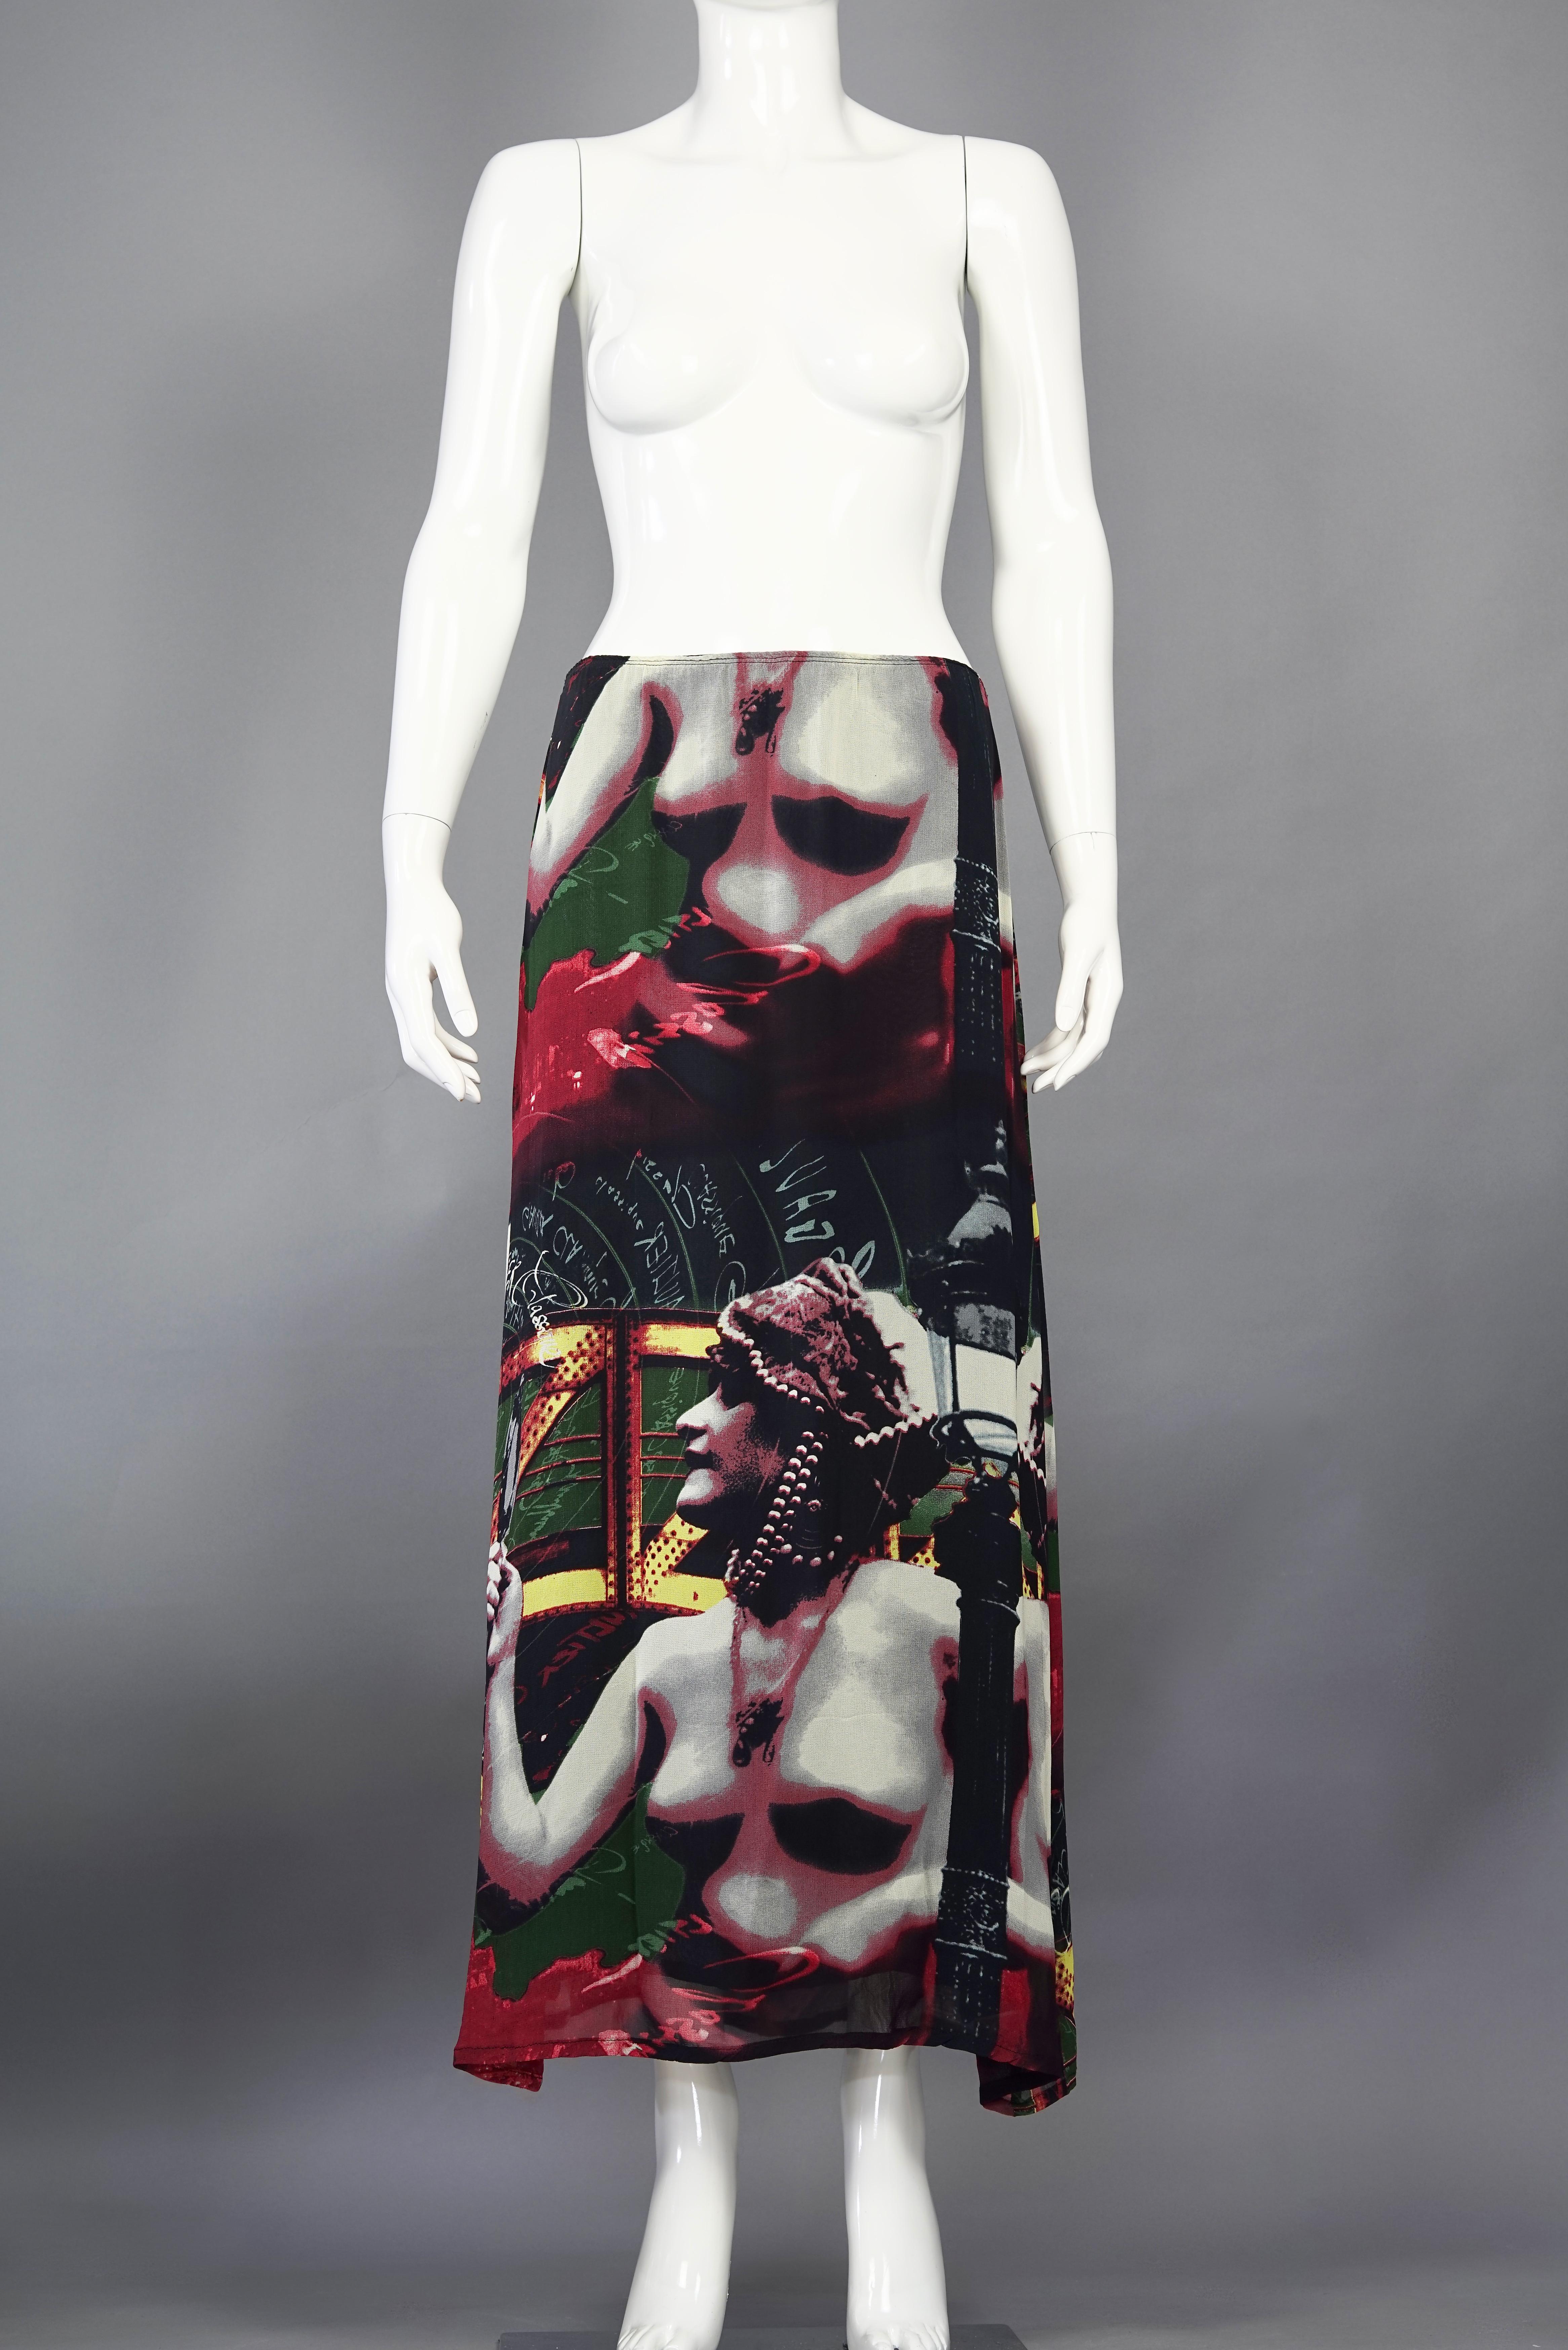 Vintage JEAN PAUL GAULTIER Ancient Greek Bust Print Mesh Maxi Skirt

Measurements taken laid flat, please double waist and hips:
Waist: 14.17 inches (36 cm) without stretching
Hips: 23.62 inches (60 cm) without stretching
Length: 37.40 inches (95